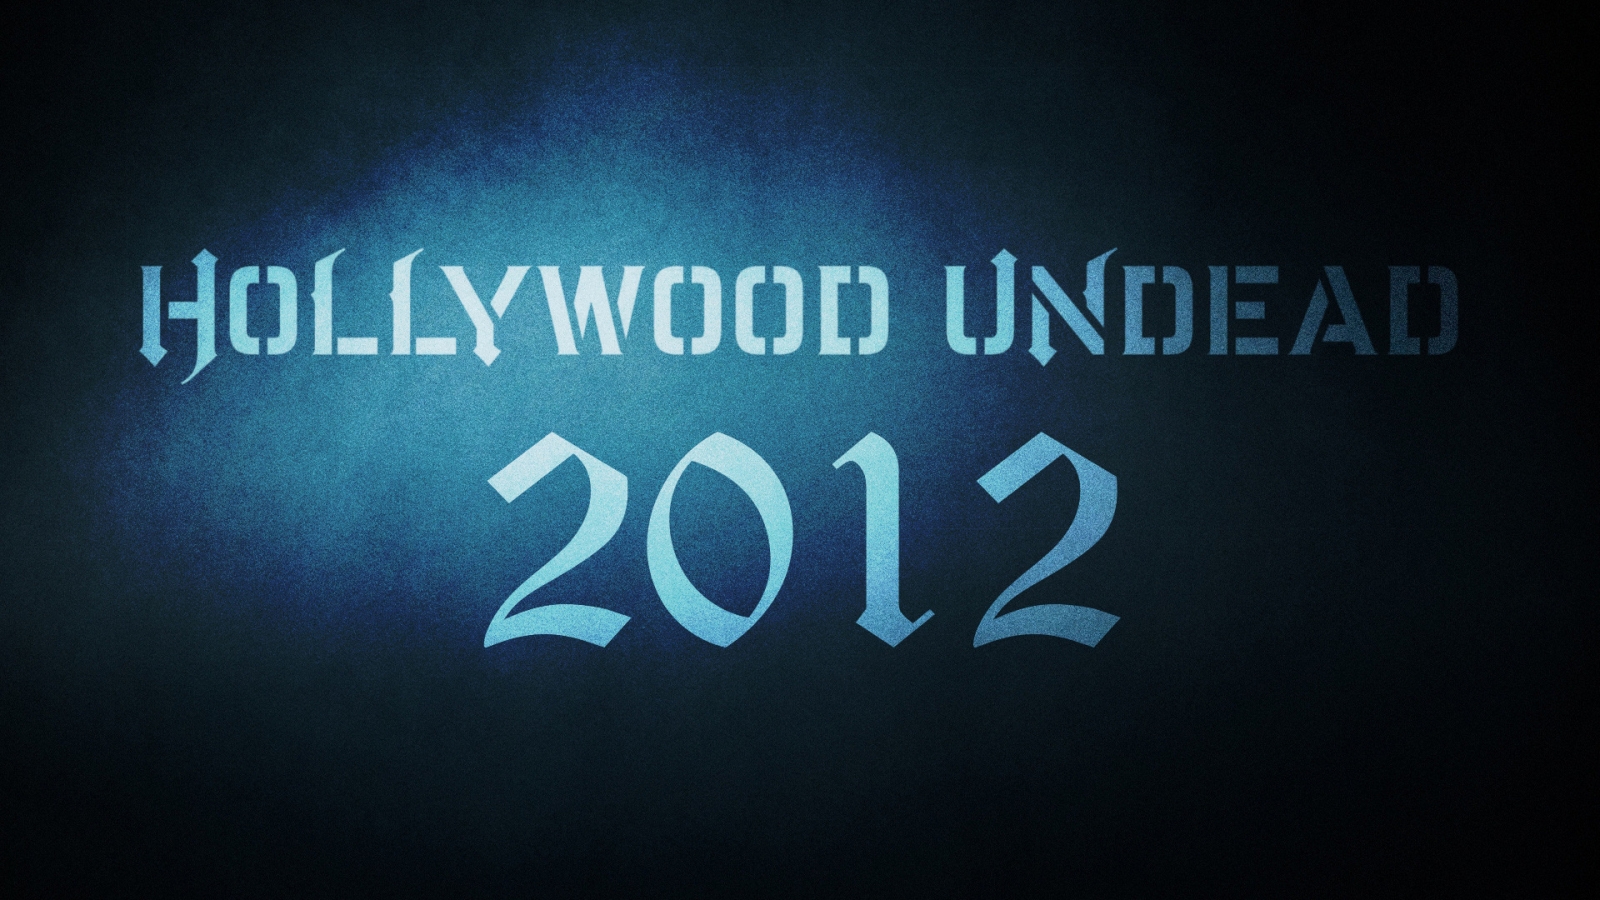 Hollywood Undead 2012 for 1600 x 900 HDTV resolution